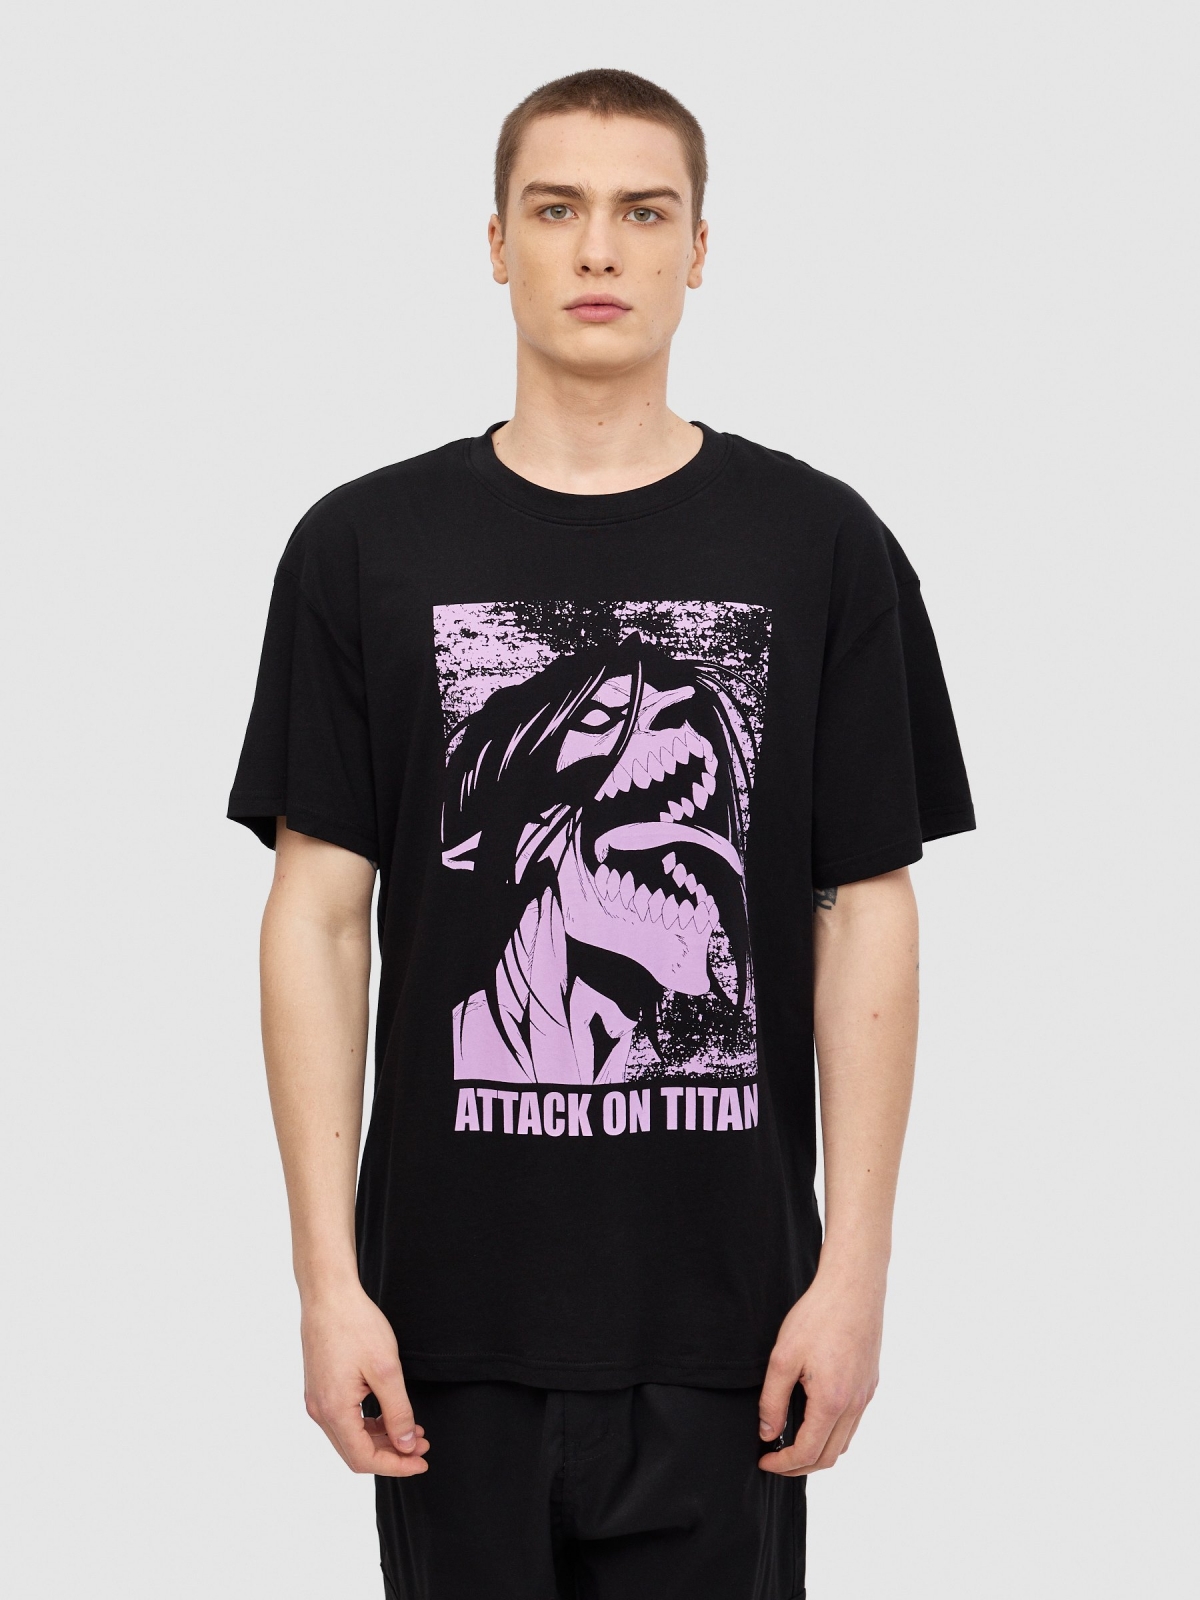 Attack On Titan oversize t-shirt black middle front view